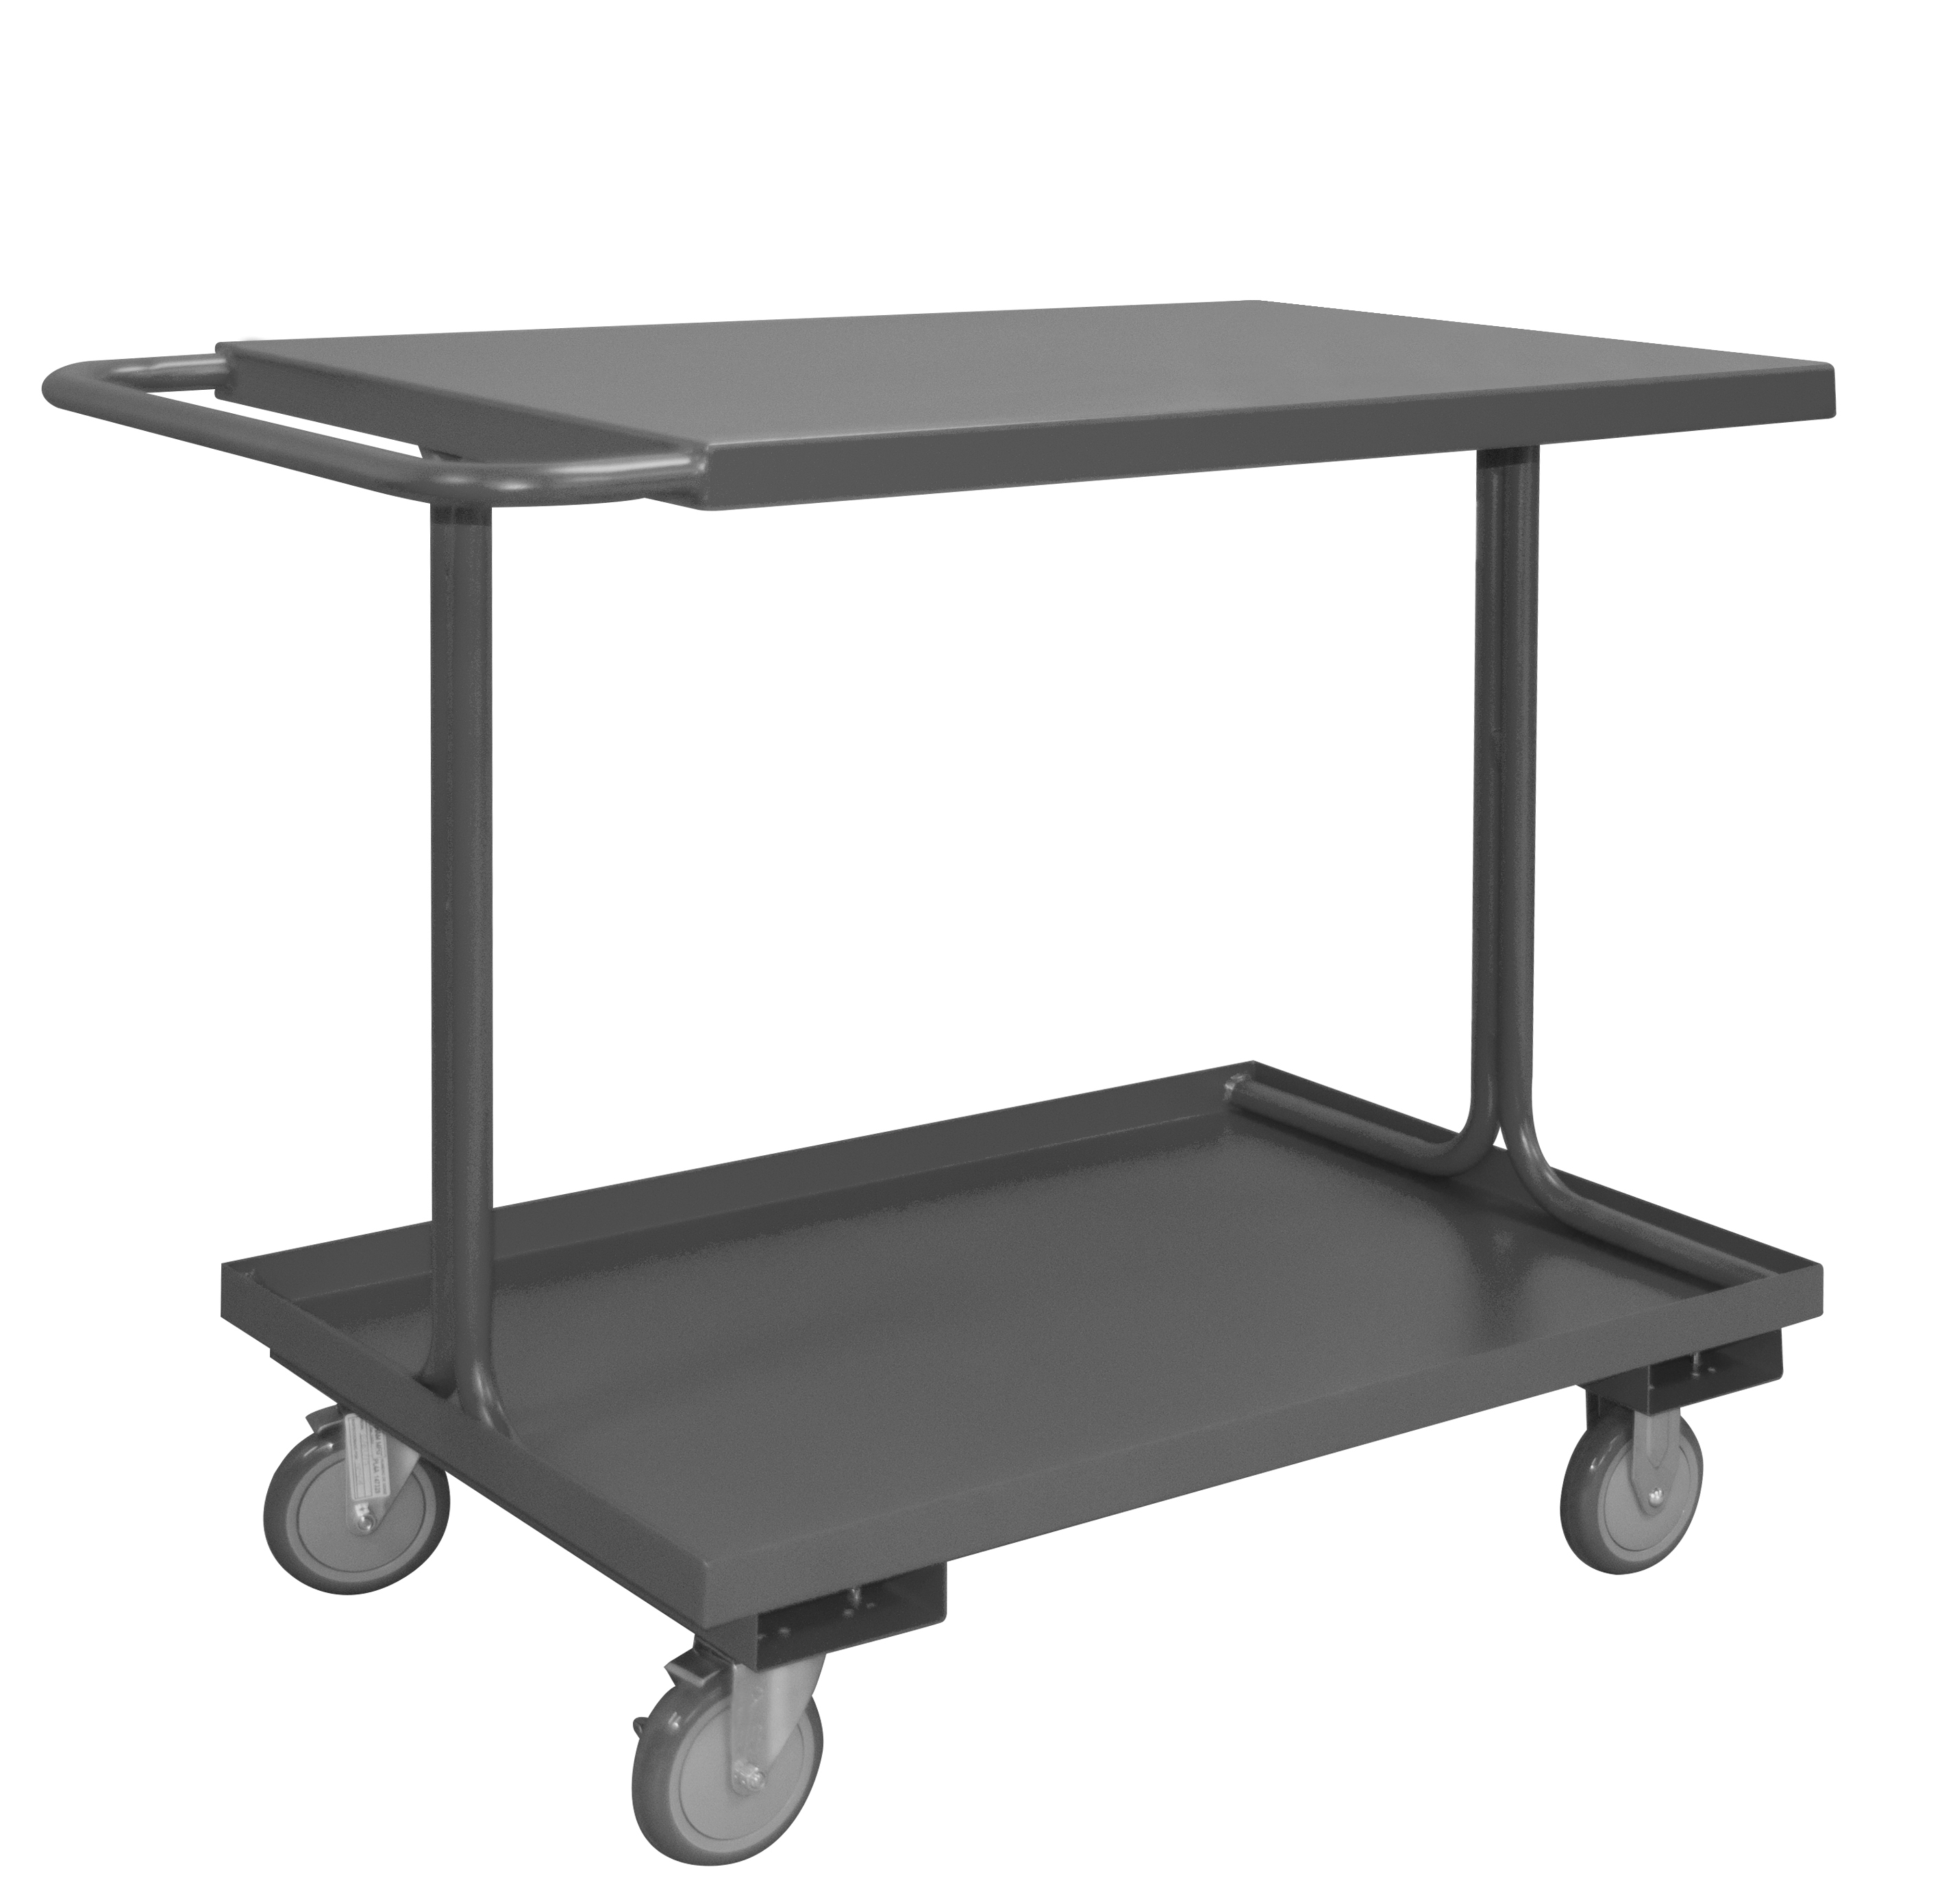 Durham EAS-1832-95 Easy Access Shelf Cart with 5" x 1-1/4" Polyurethane casters, (2) rigid and (2) swivel with side breaks, 2 shelves, 1-1/2" lips up on bottom shelf and tubular push handle, gray